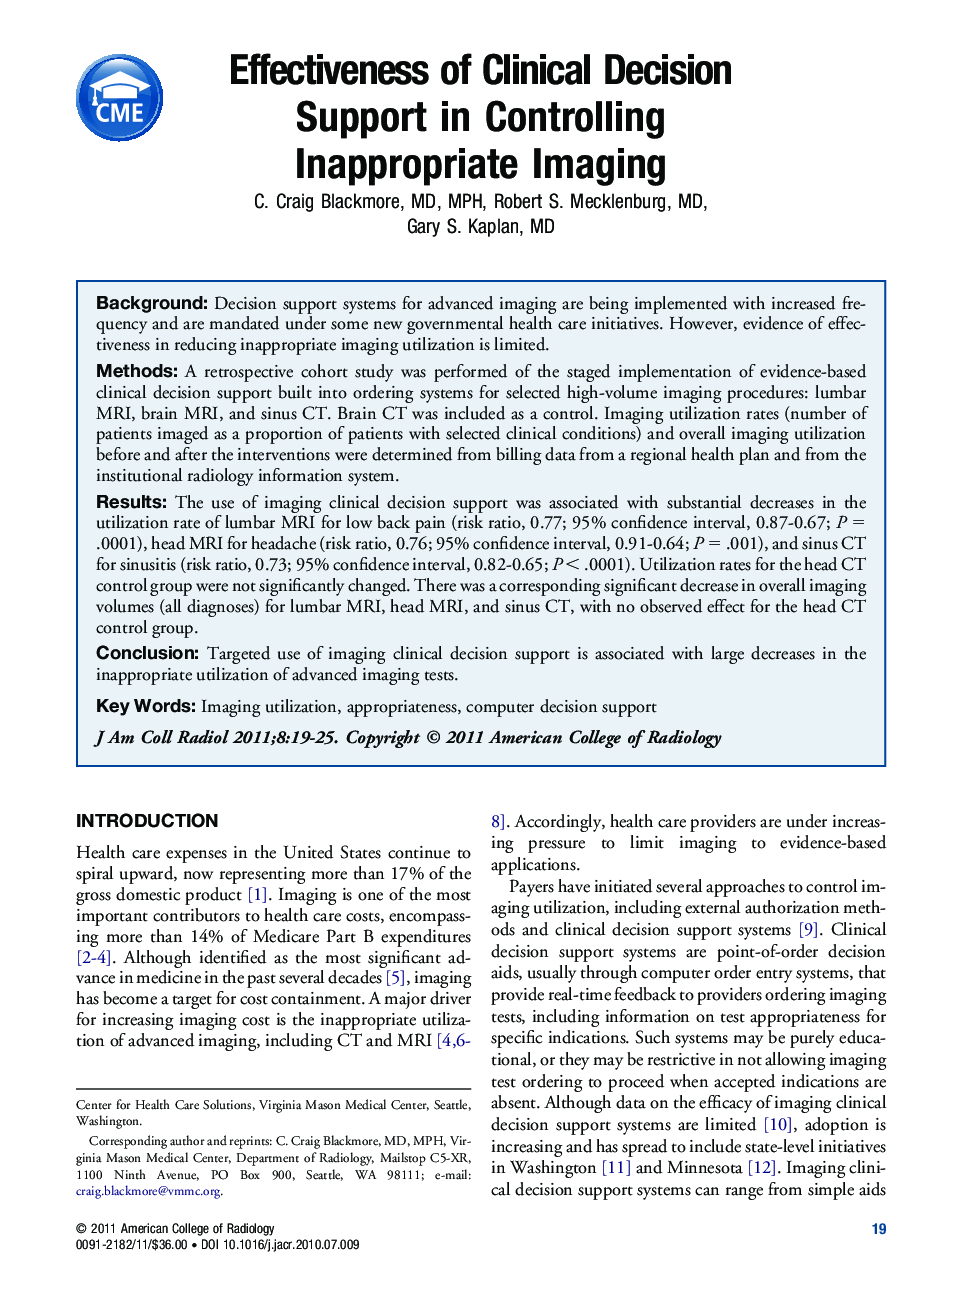 Effectiveness of Clinical Decision Support in Controlling Inappropriate Imaging